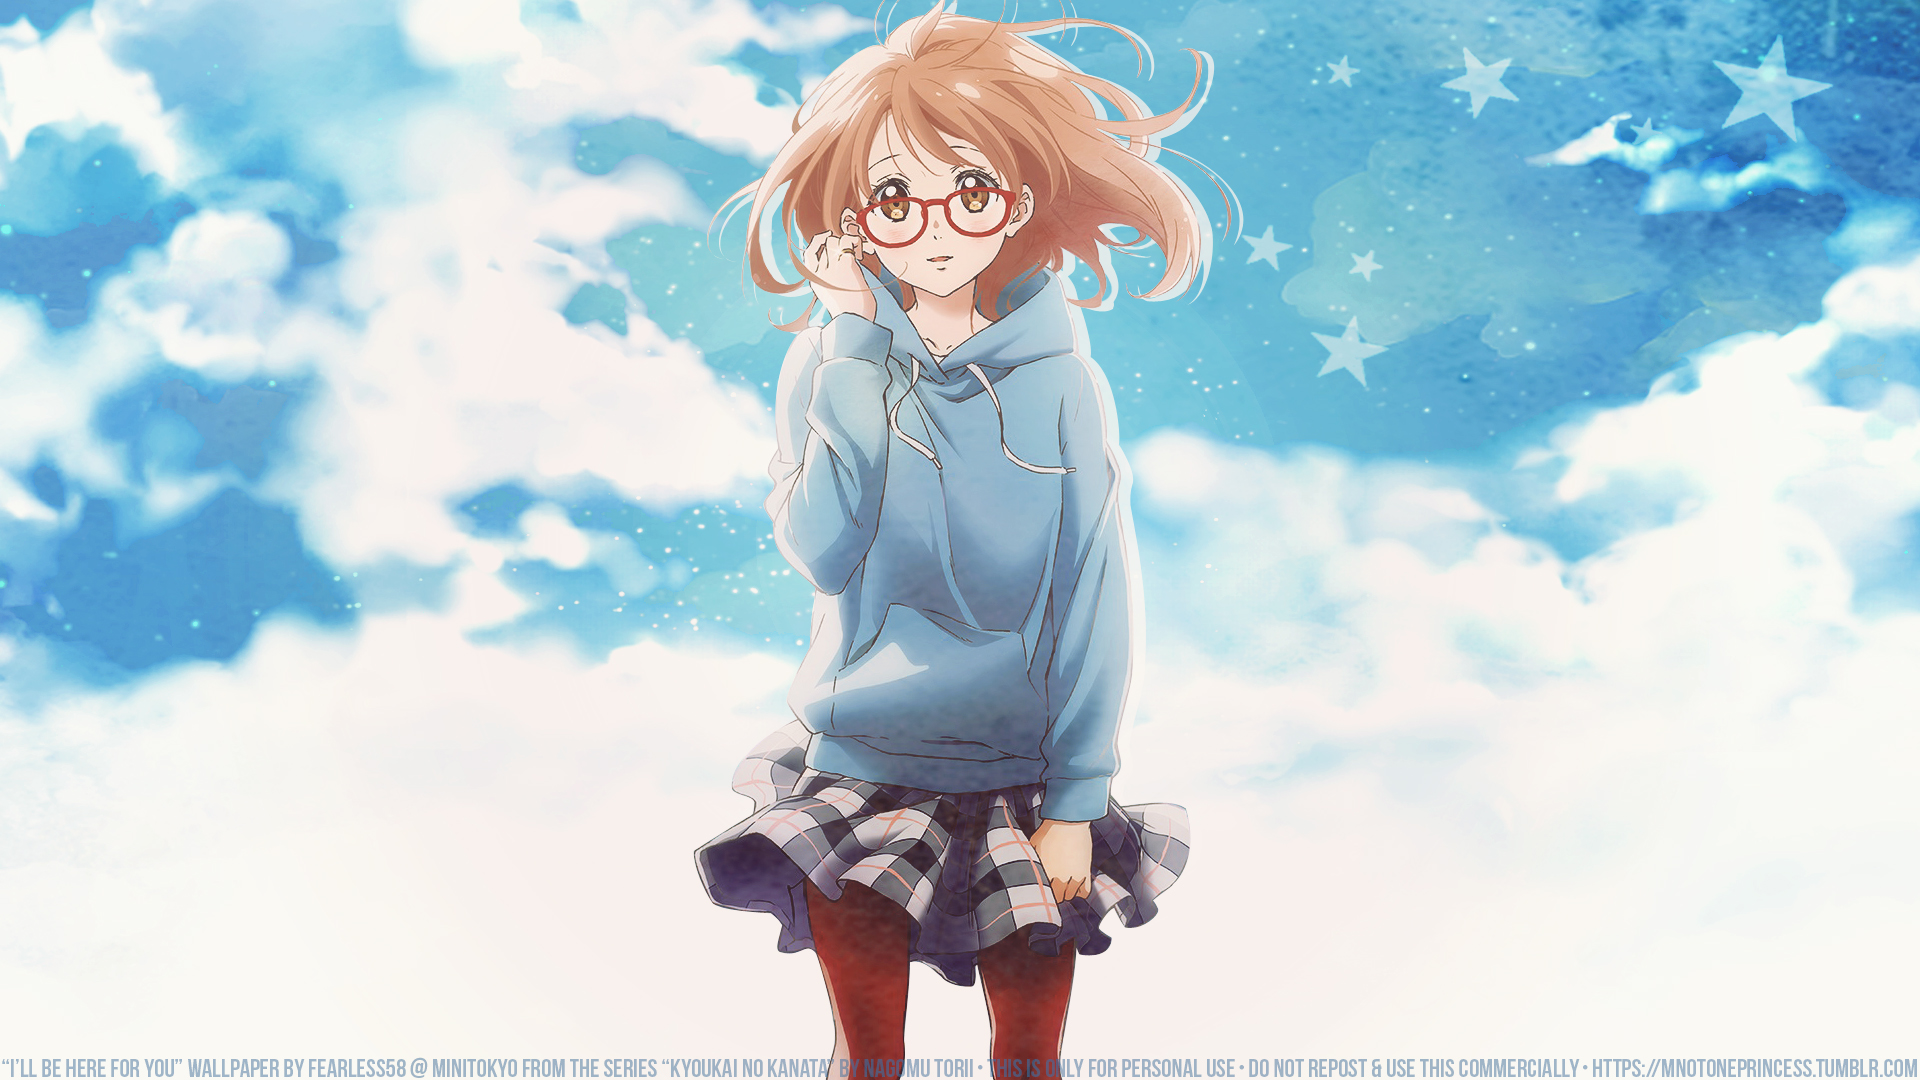 A dangerous urban fantasy A review of Beyond the Boundary